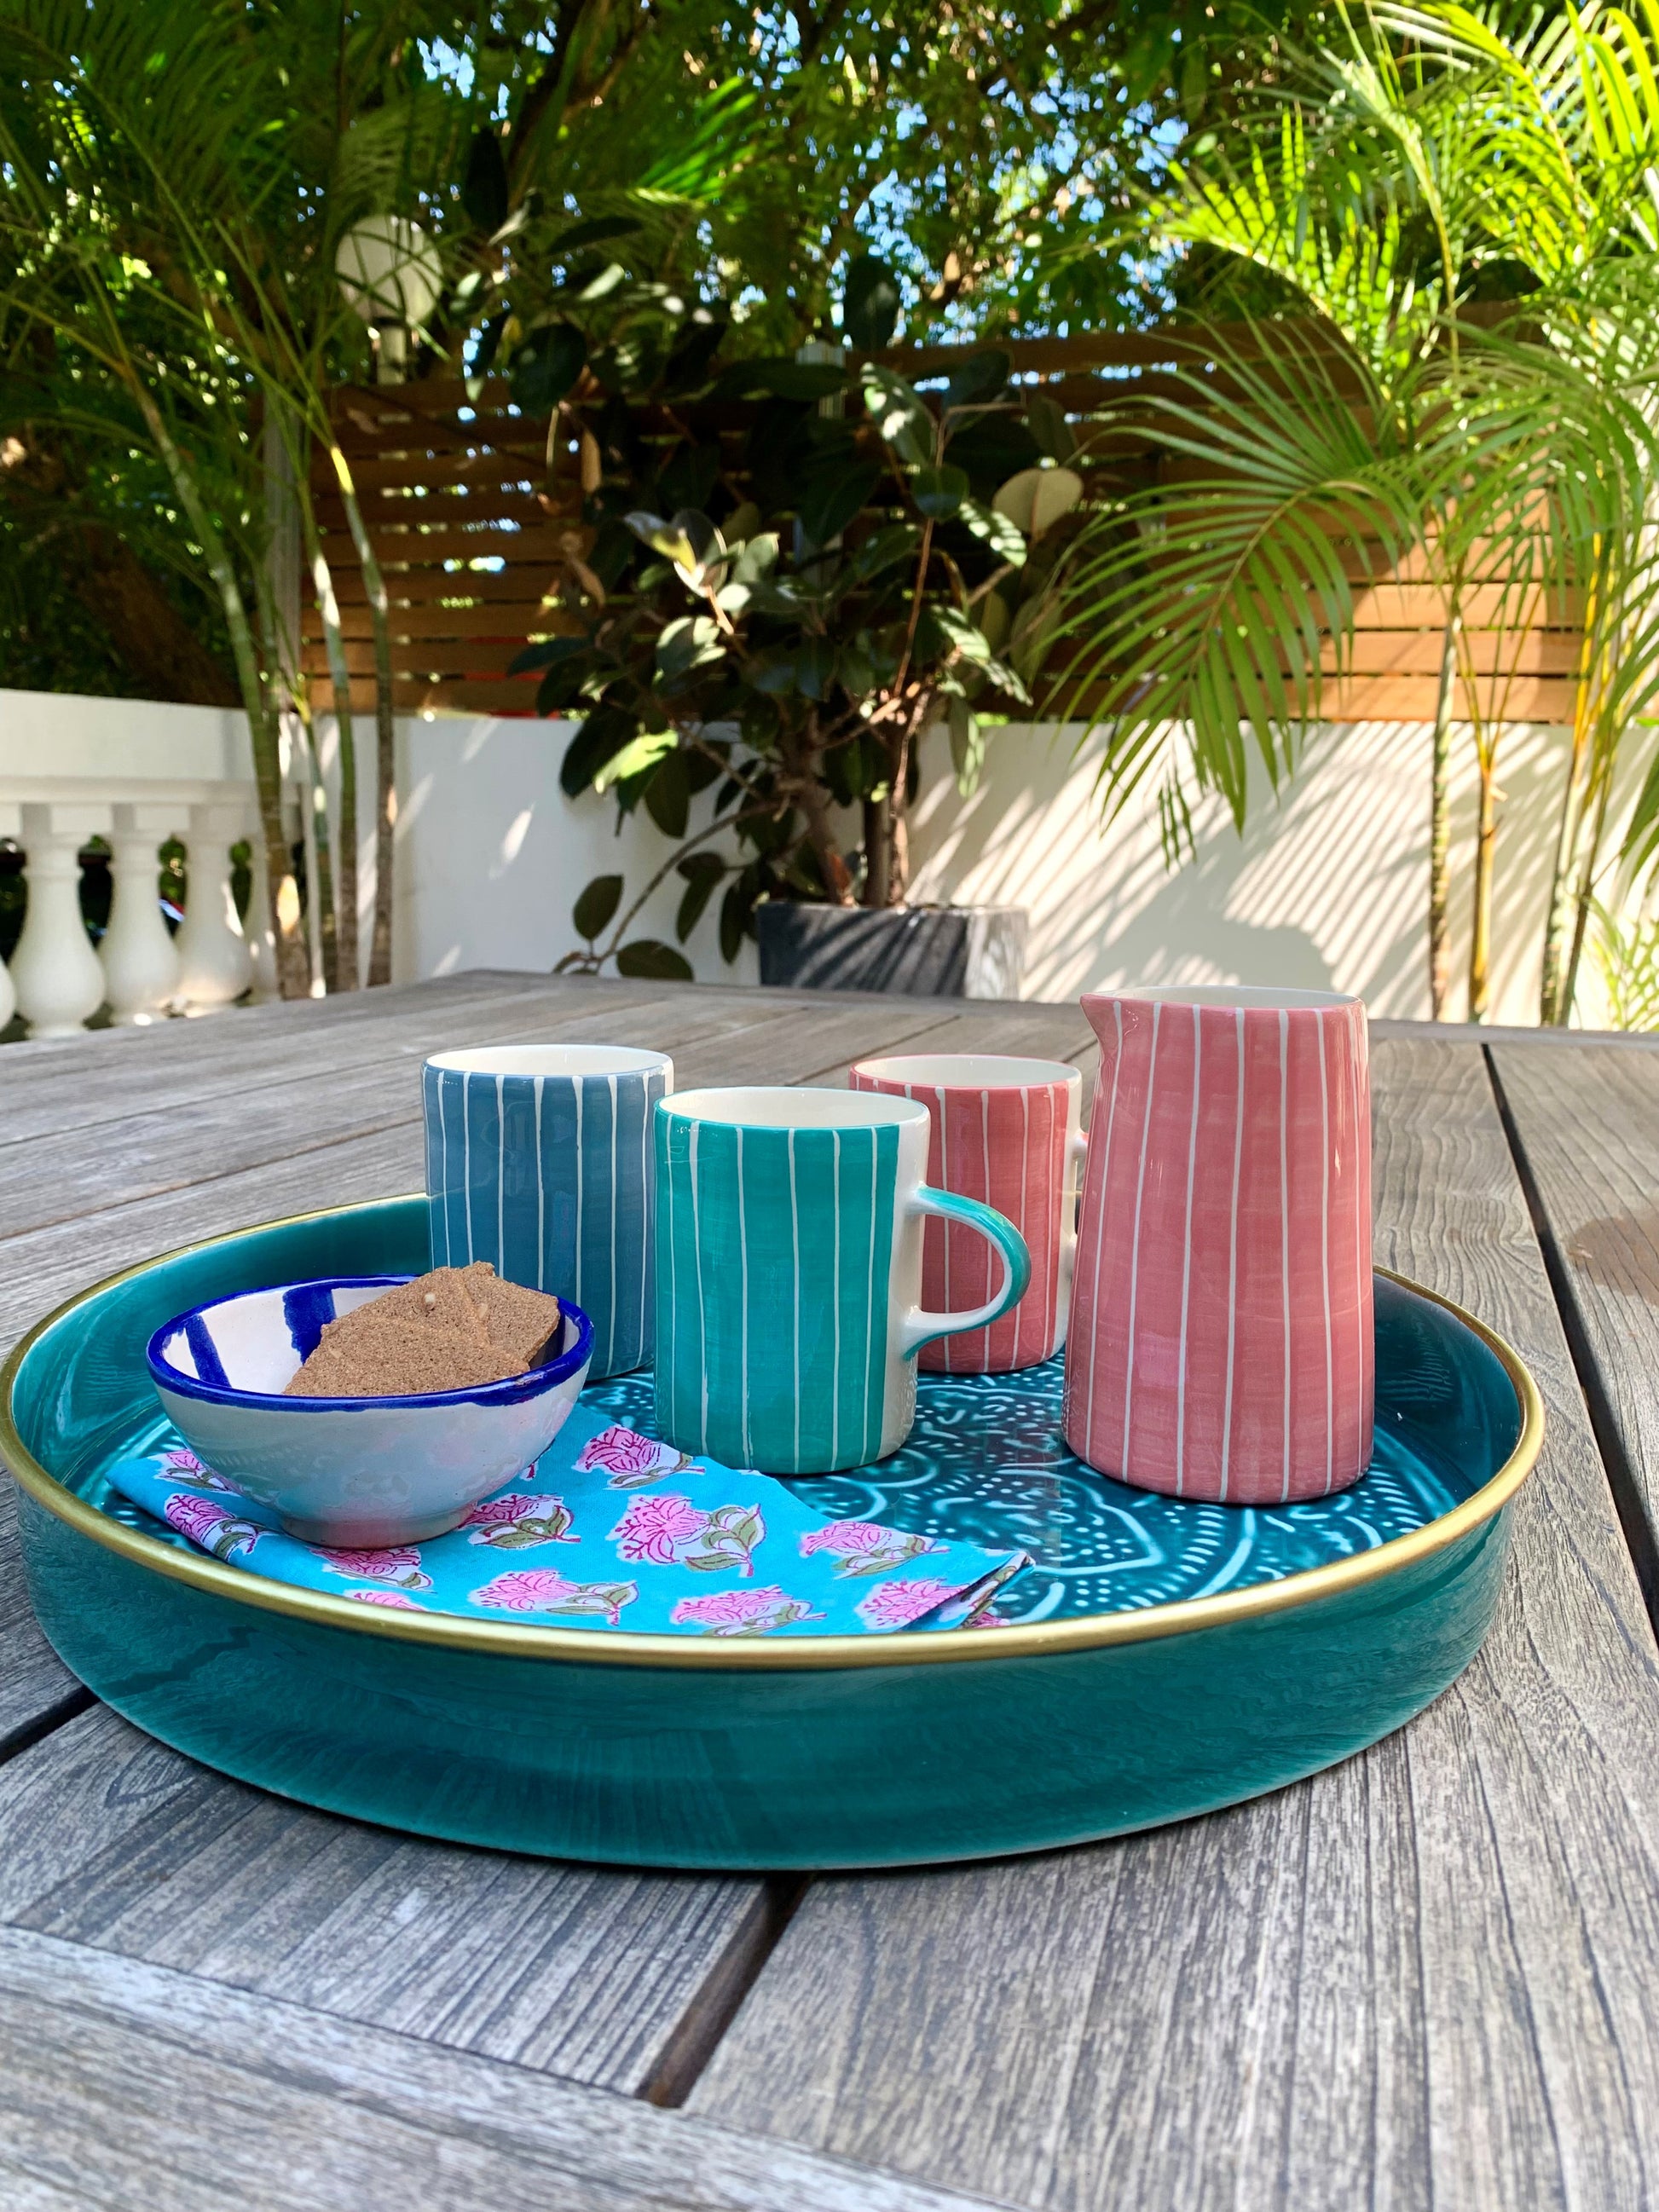 Three hand-painted mugs in grey, pink and mint green on a tray with a milk jug and biscuits.  The tray is on a table in the garden.